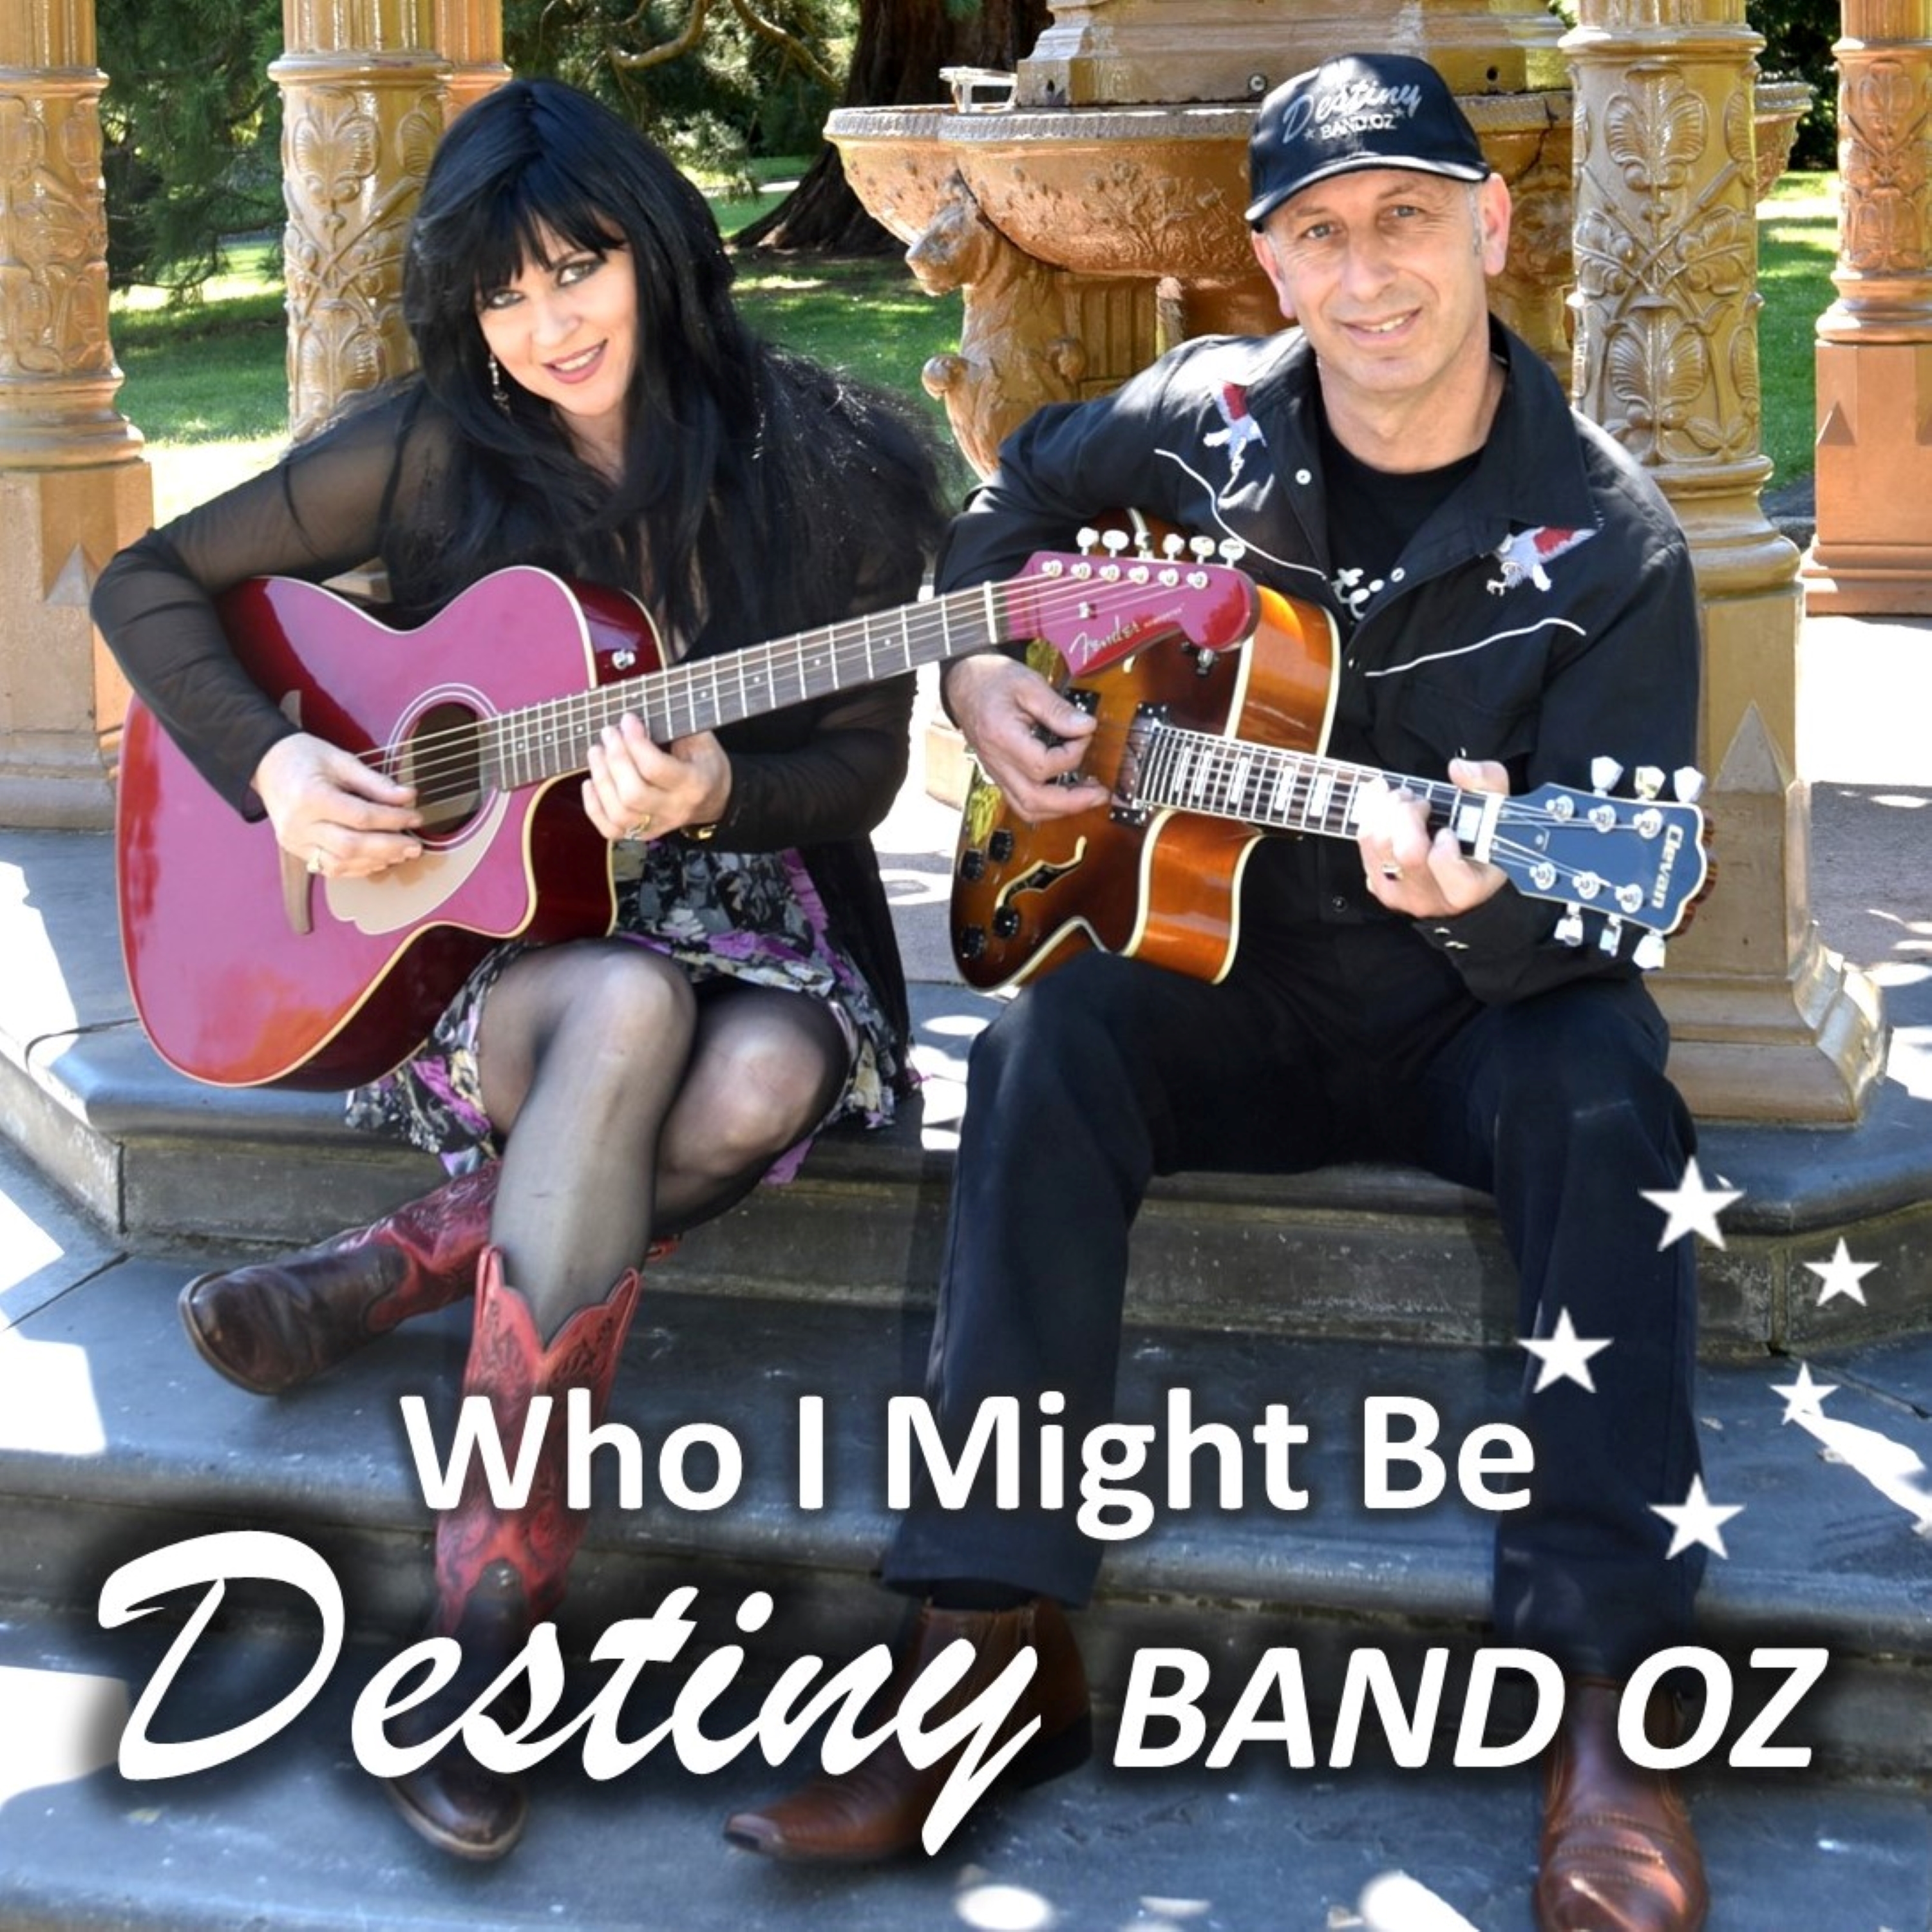 Art for My Time Of Need by Destiny Band Oz - Tessa Libreri